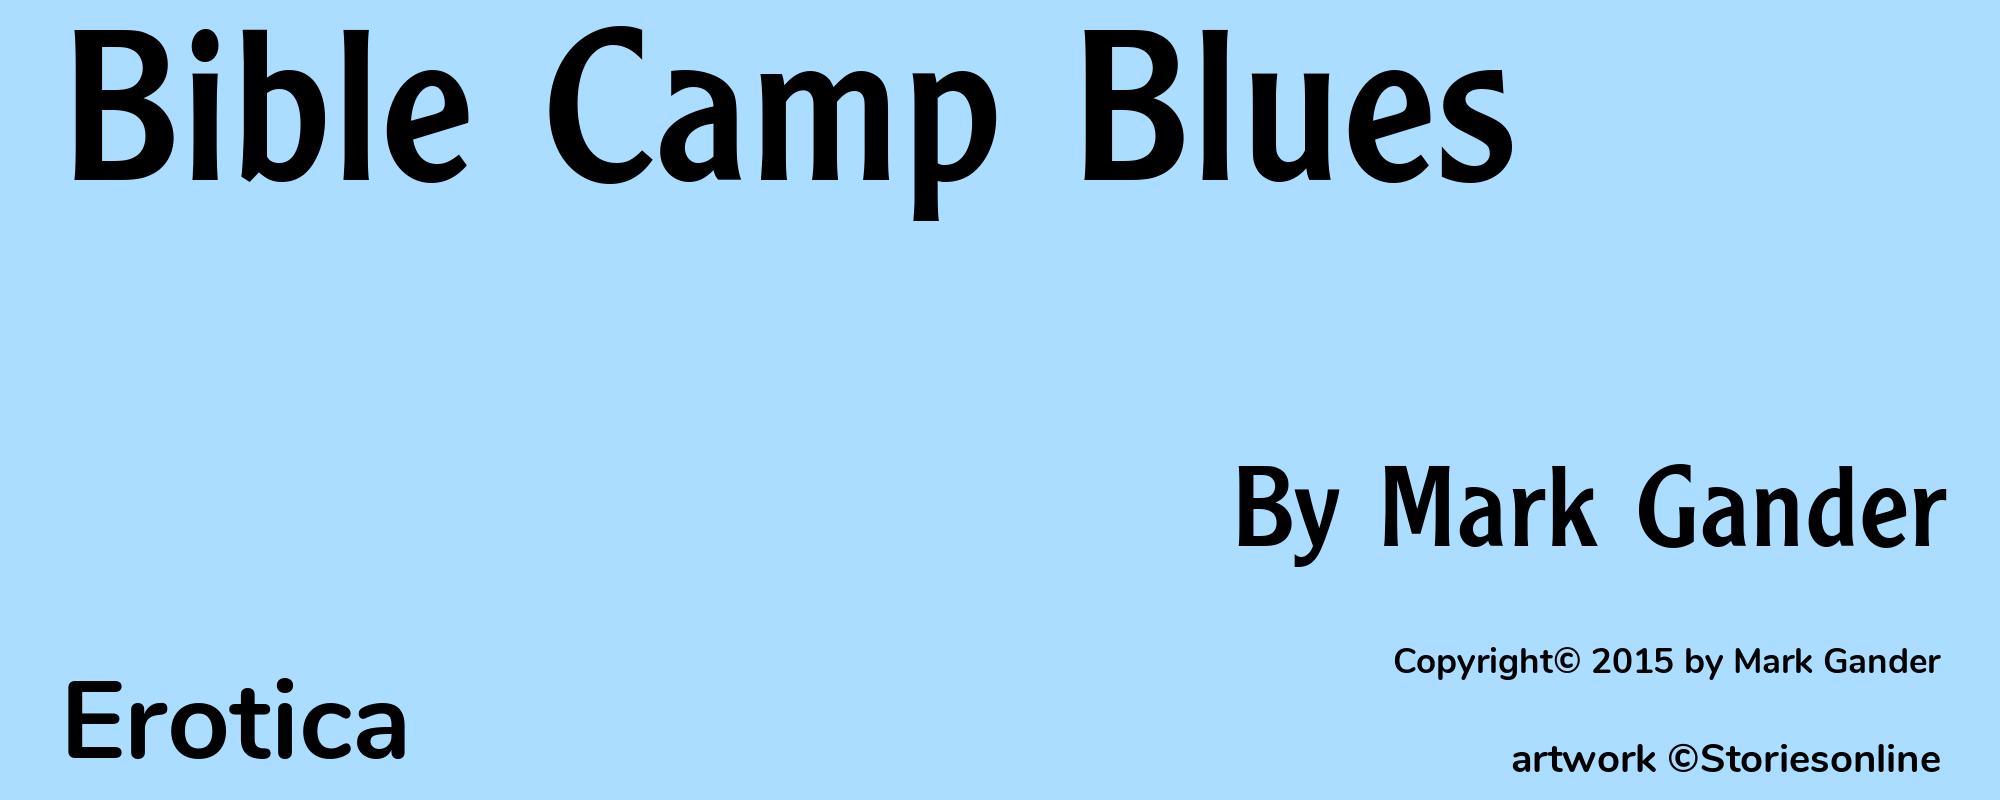 Bible Camp Blues - Cover